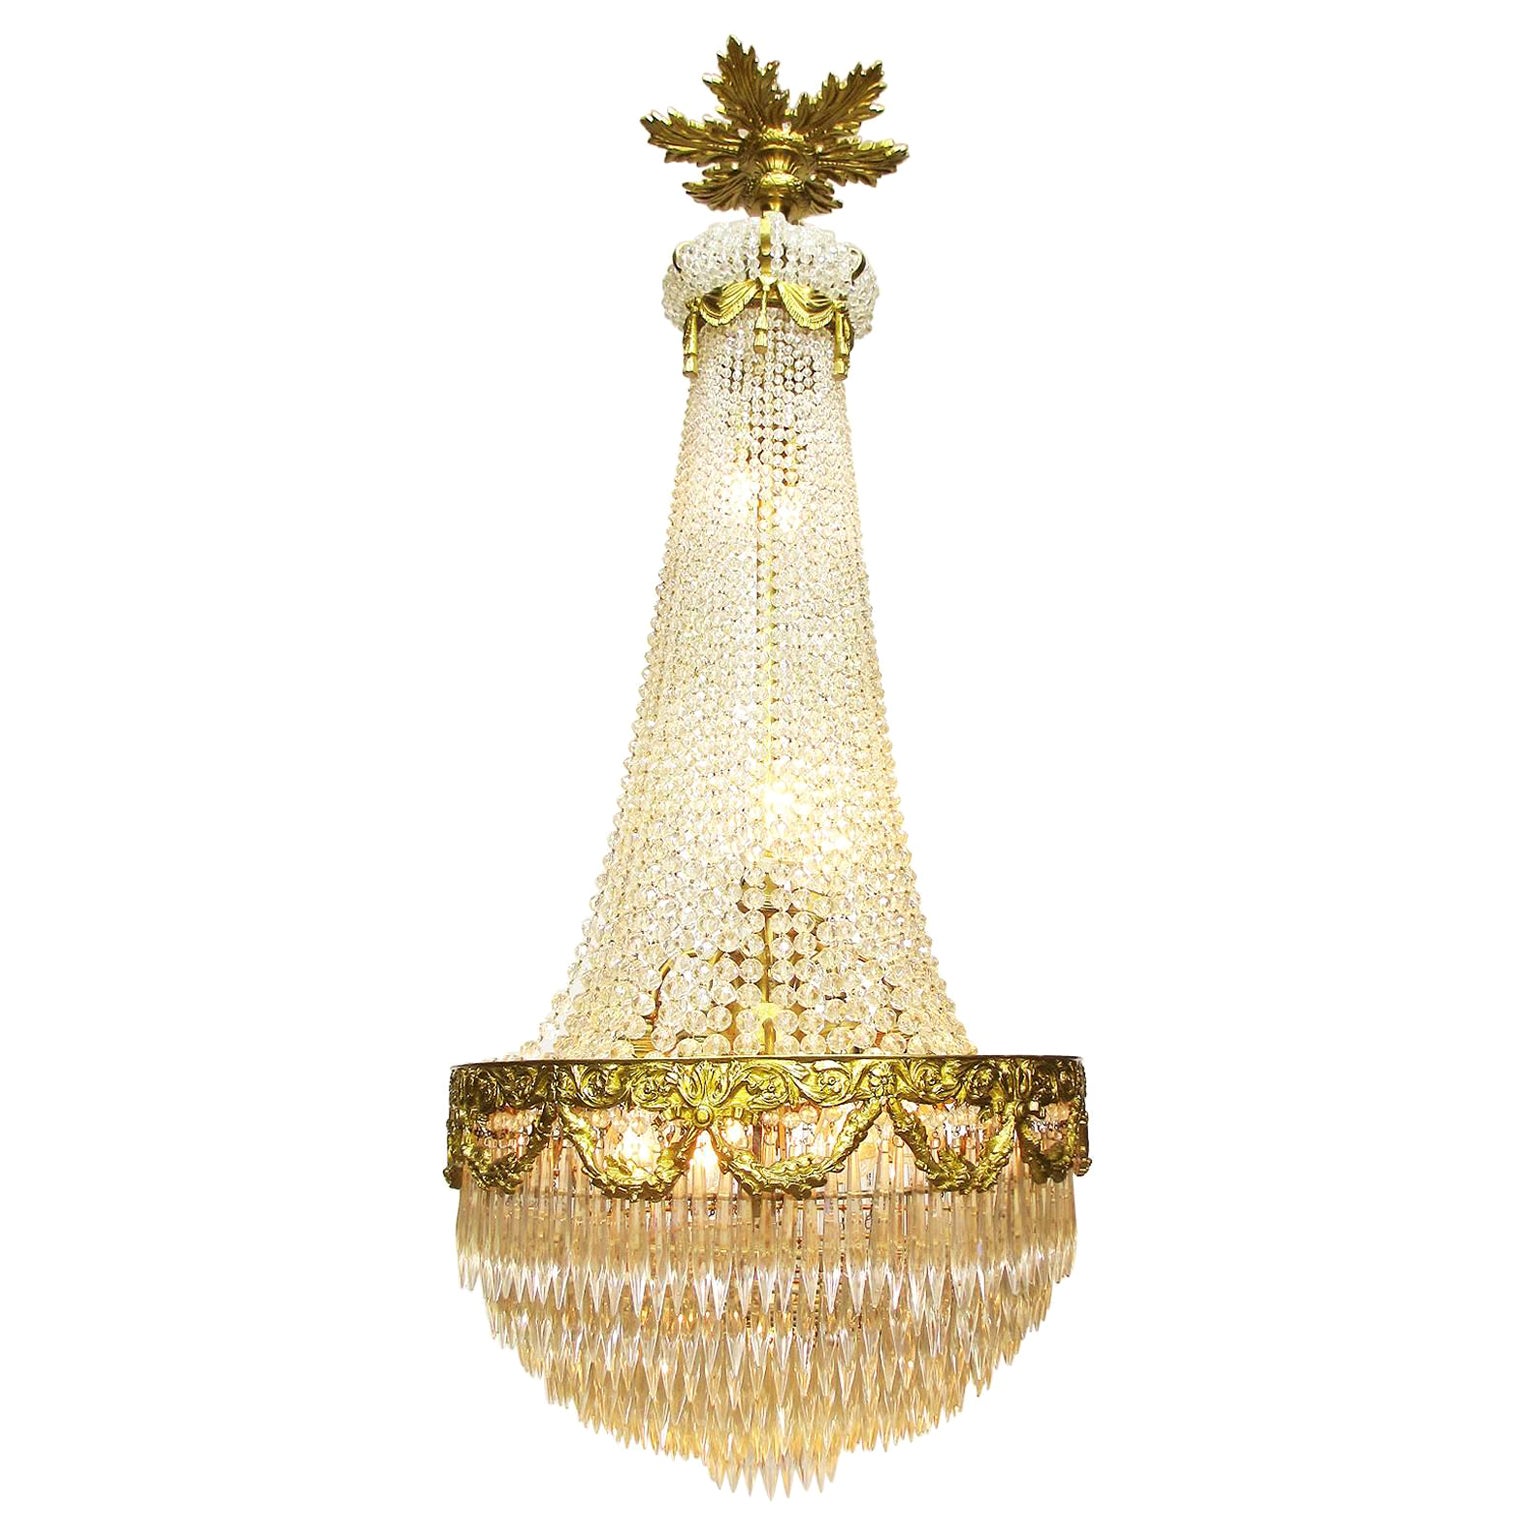 French 19th-20th Century Louis XVI Style Gilt Bronze and Cut-Glass Chandelier For Sale